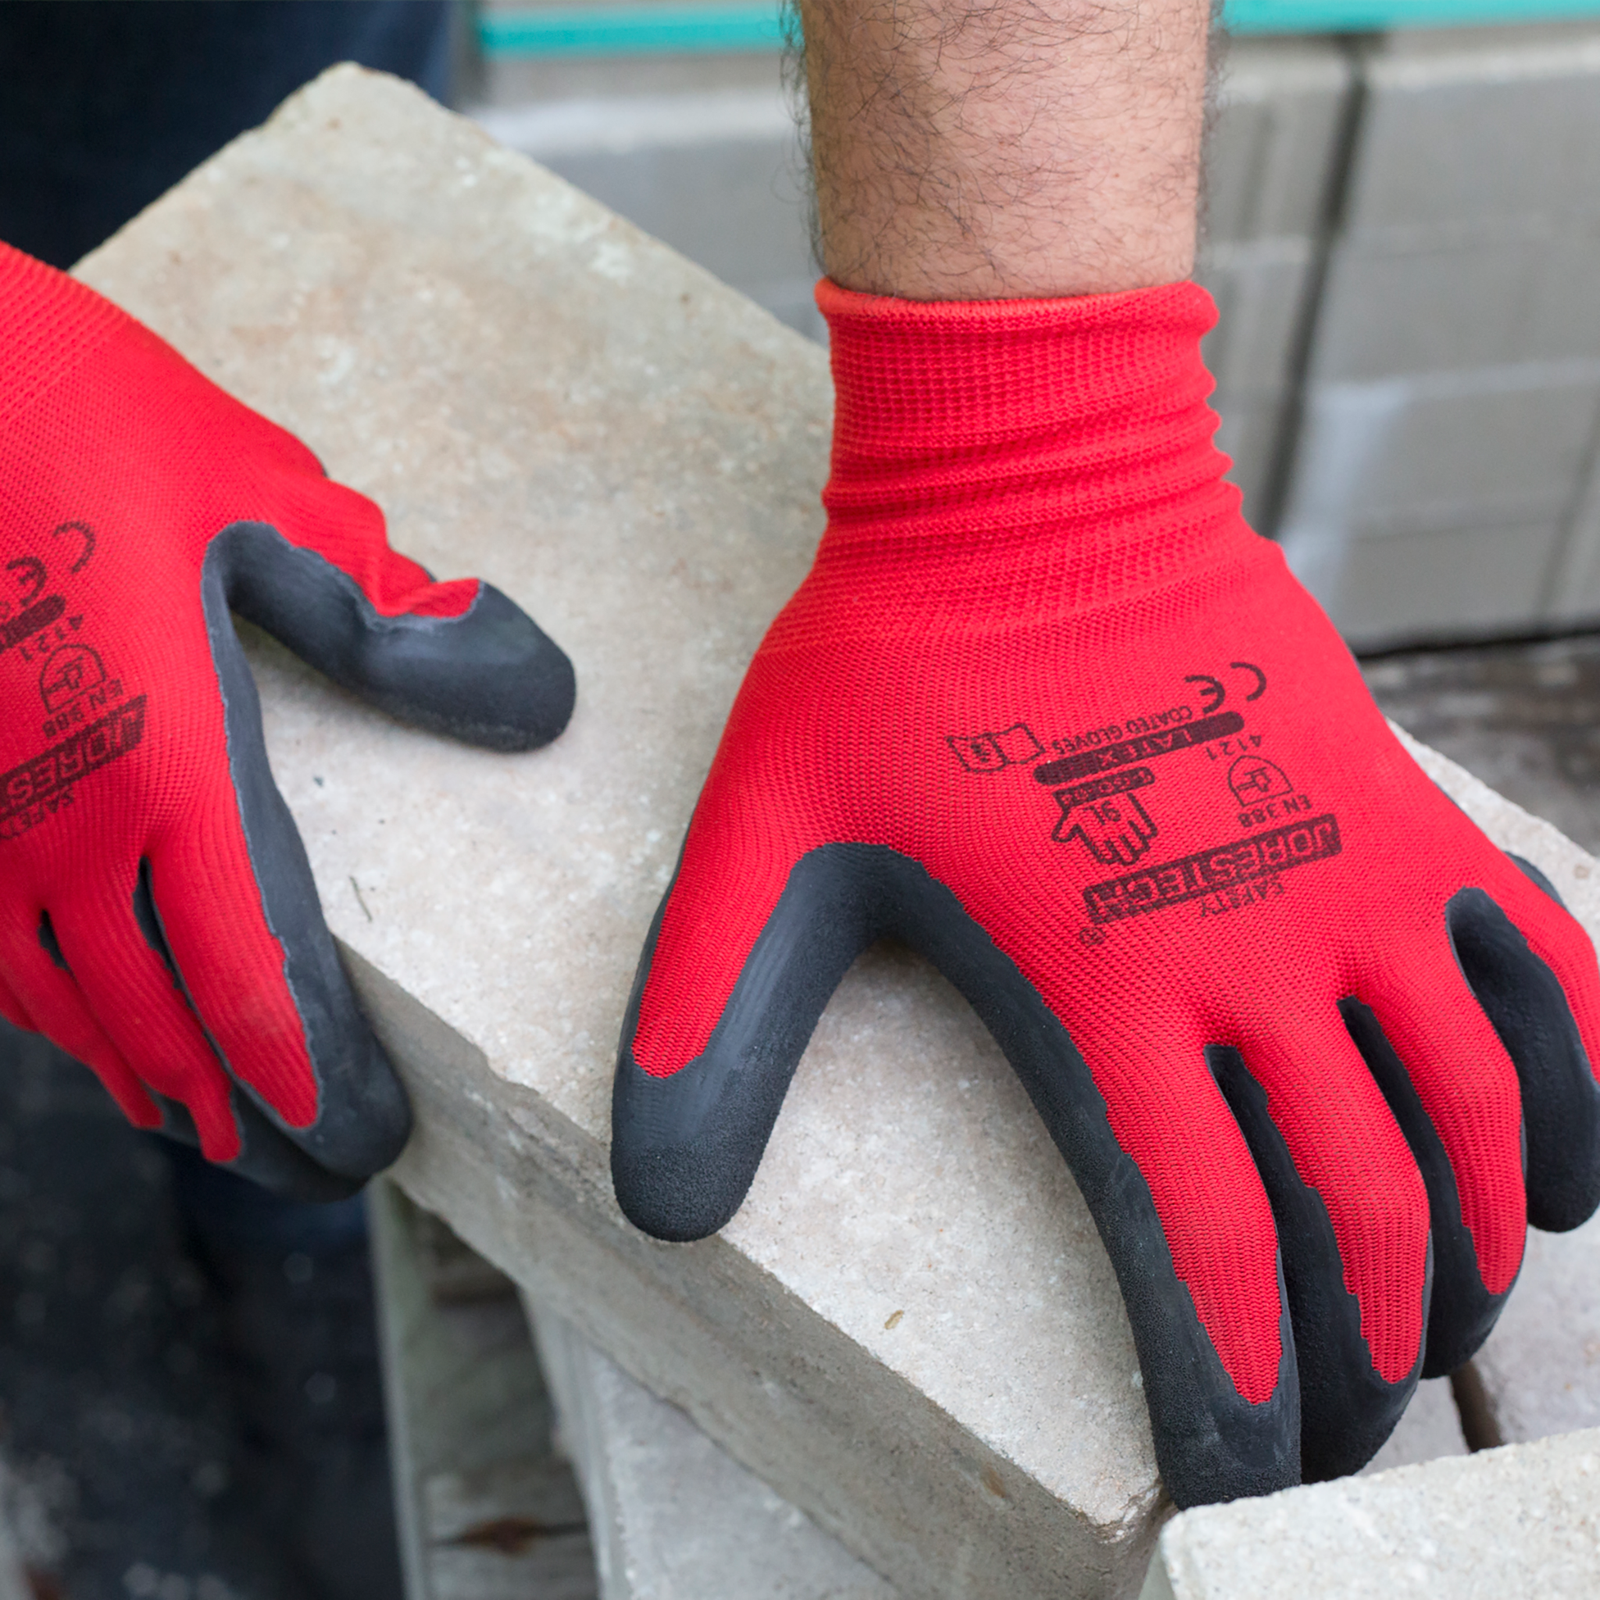 Hands of worker wearing the red and black JORESTECH work gloves with latex dipped palms used for construction for carrying heavy rustic cement bricks